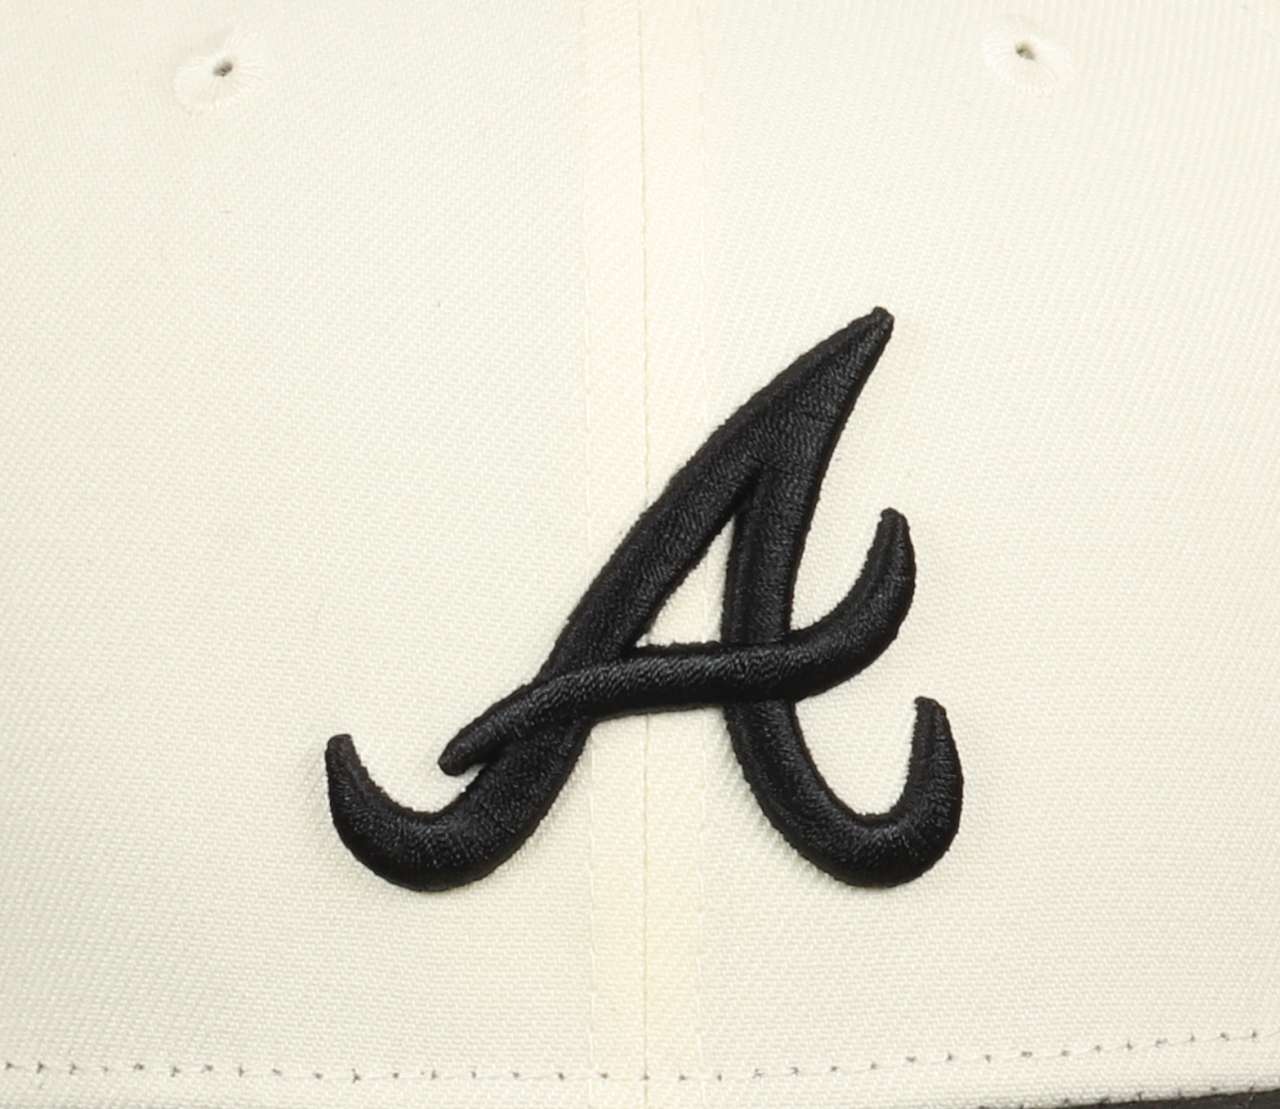 Atlanta Braves MLB Two Tone Cooperstown Braves Sidepatch Chrome Black Scarlet 59Fifty Basecap New Era